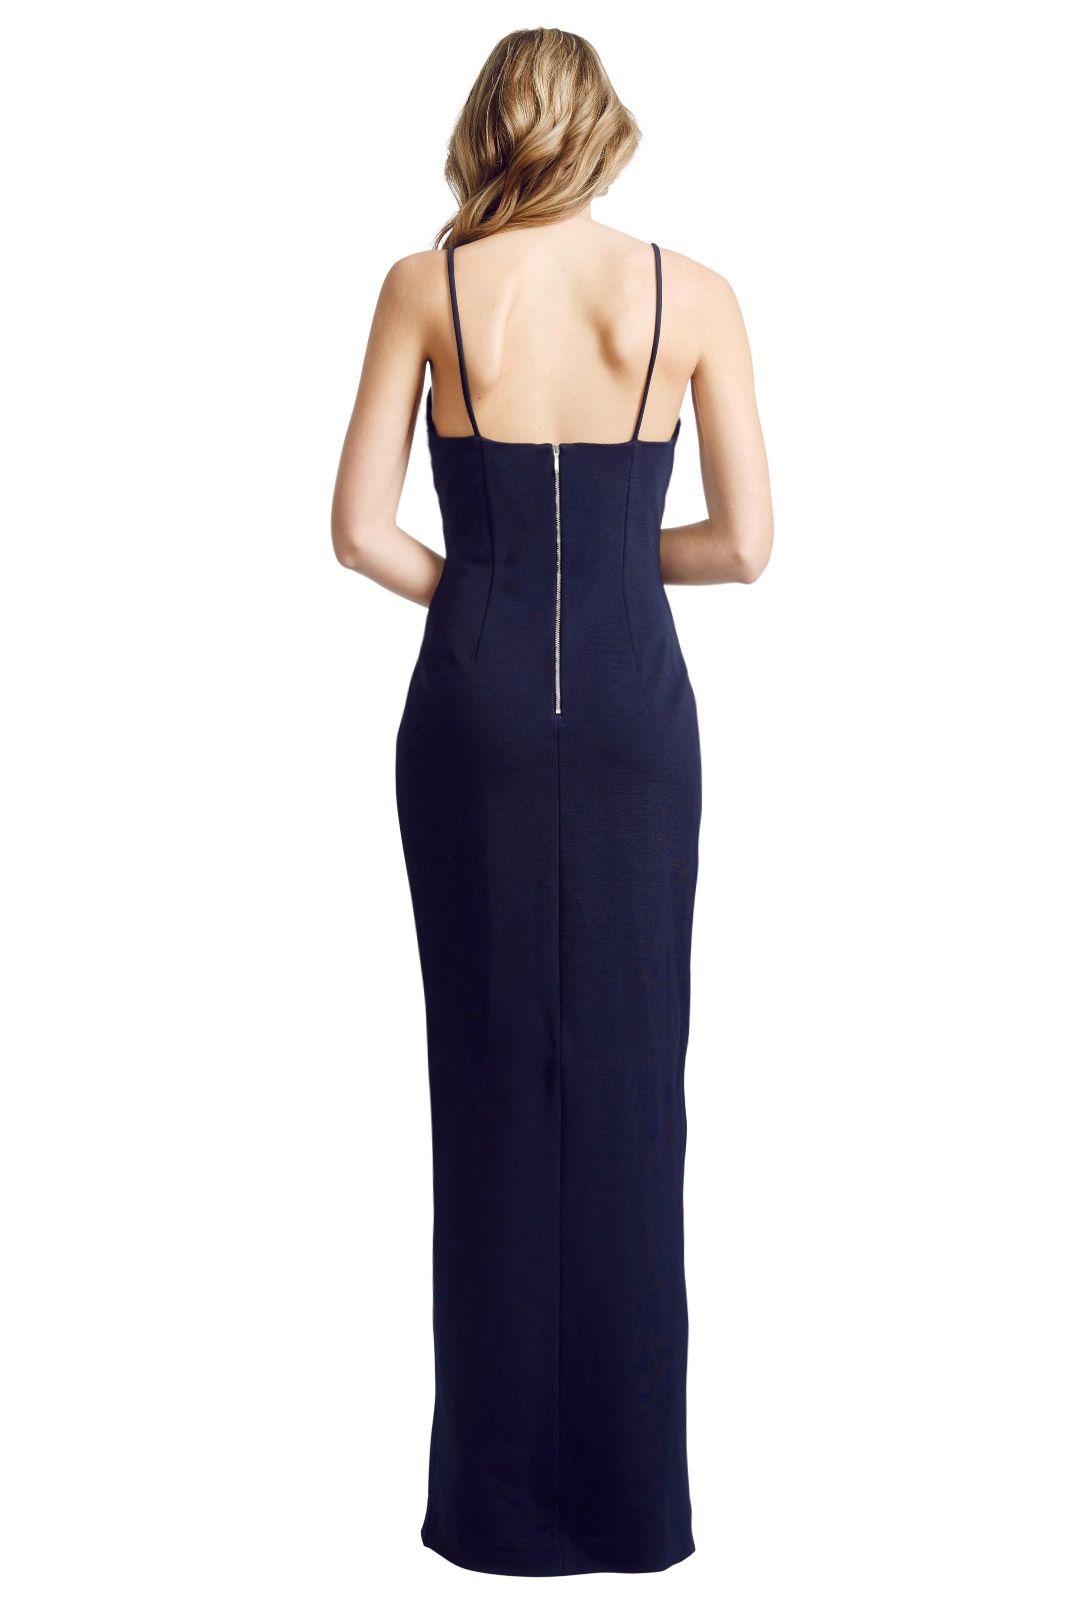 Nicholas The Label - Bandage Deep V Wire Gown - Navy - Back